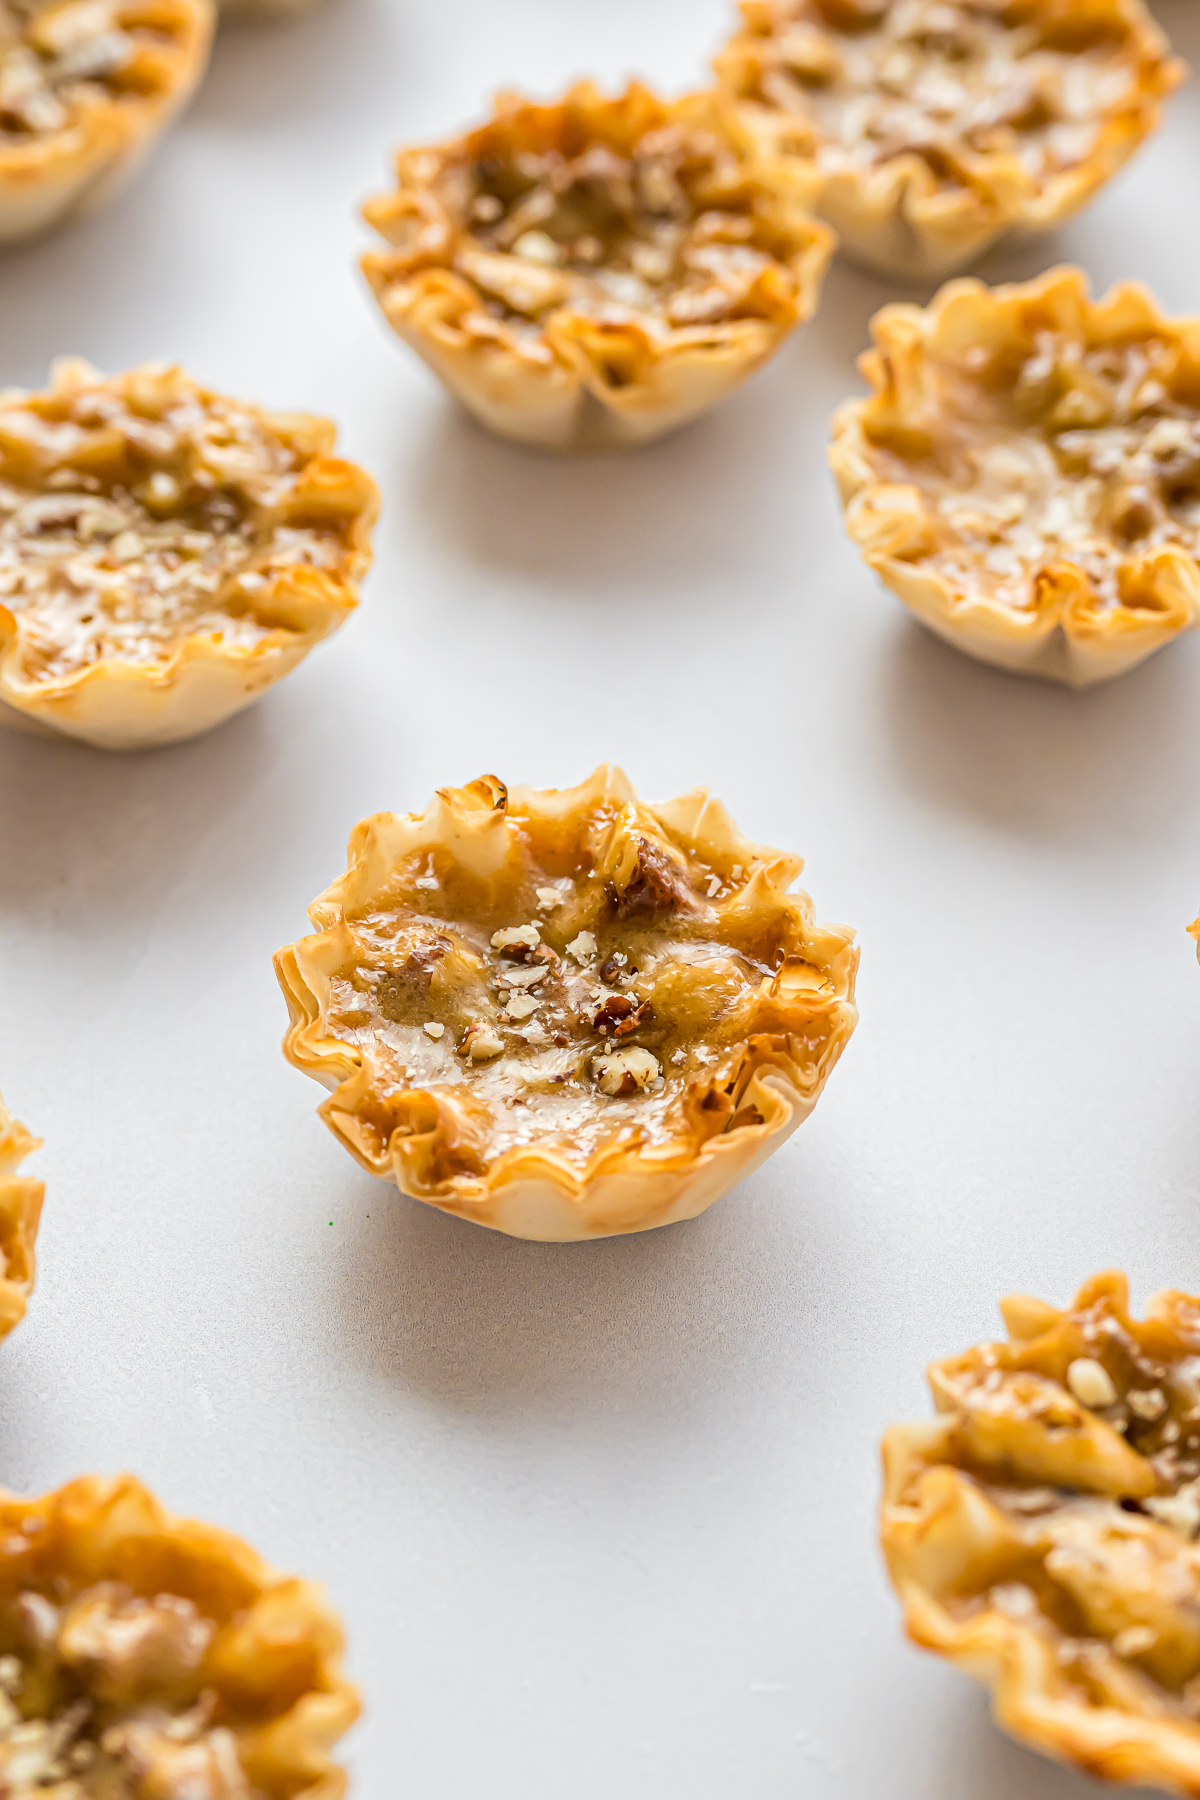 A group of Mini Pecan Pie tarts on a white surface.